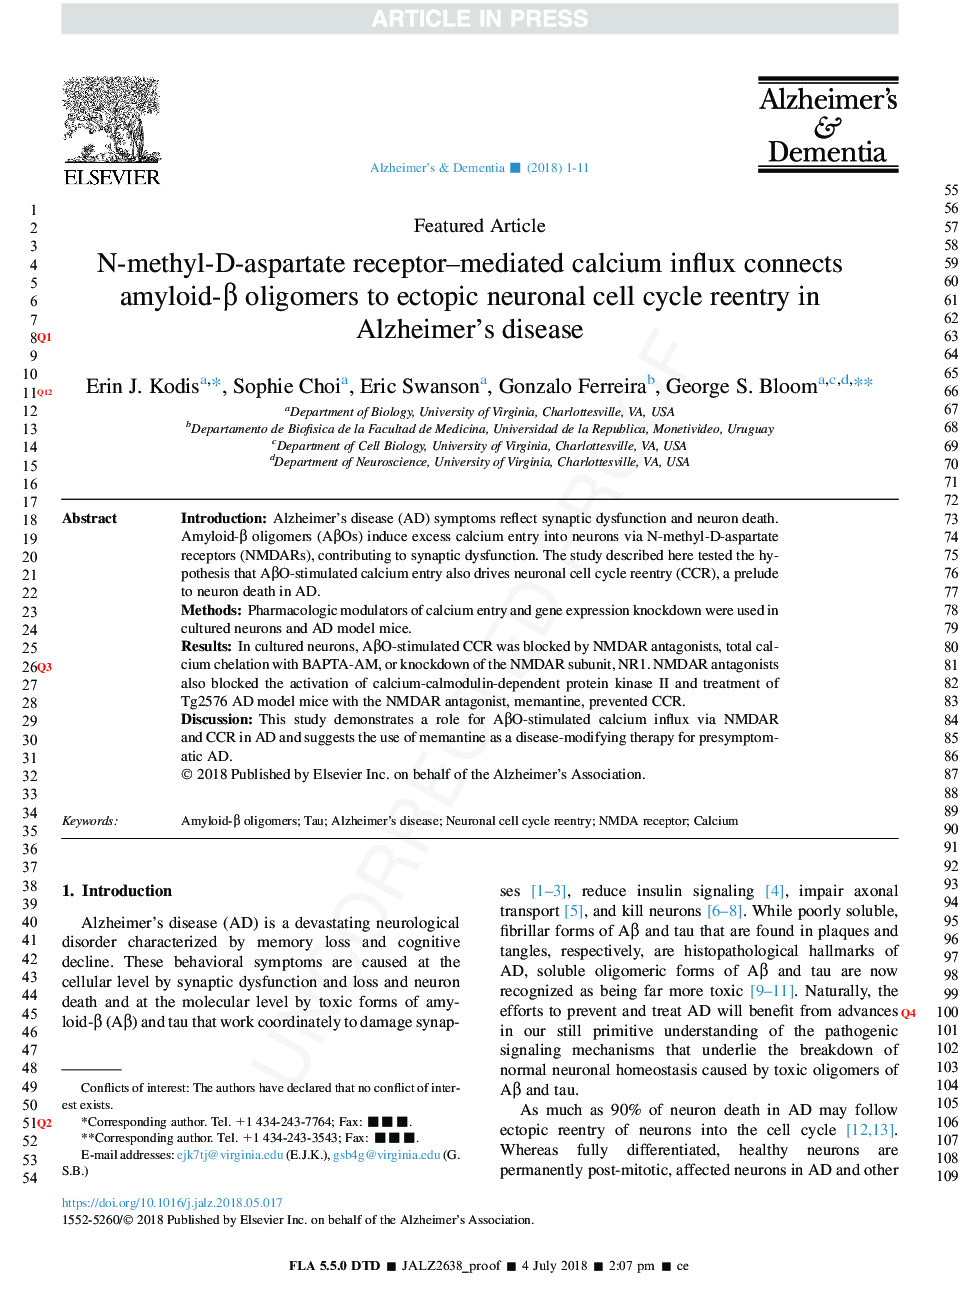 N-methyl-D-aspartate receptor-mediated calcium influx connects amyloid-Î² oligomers to ectopic neuronal cell cycle reentry in Alzheimer's disease